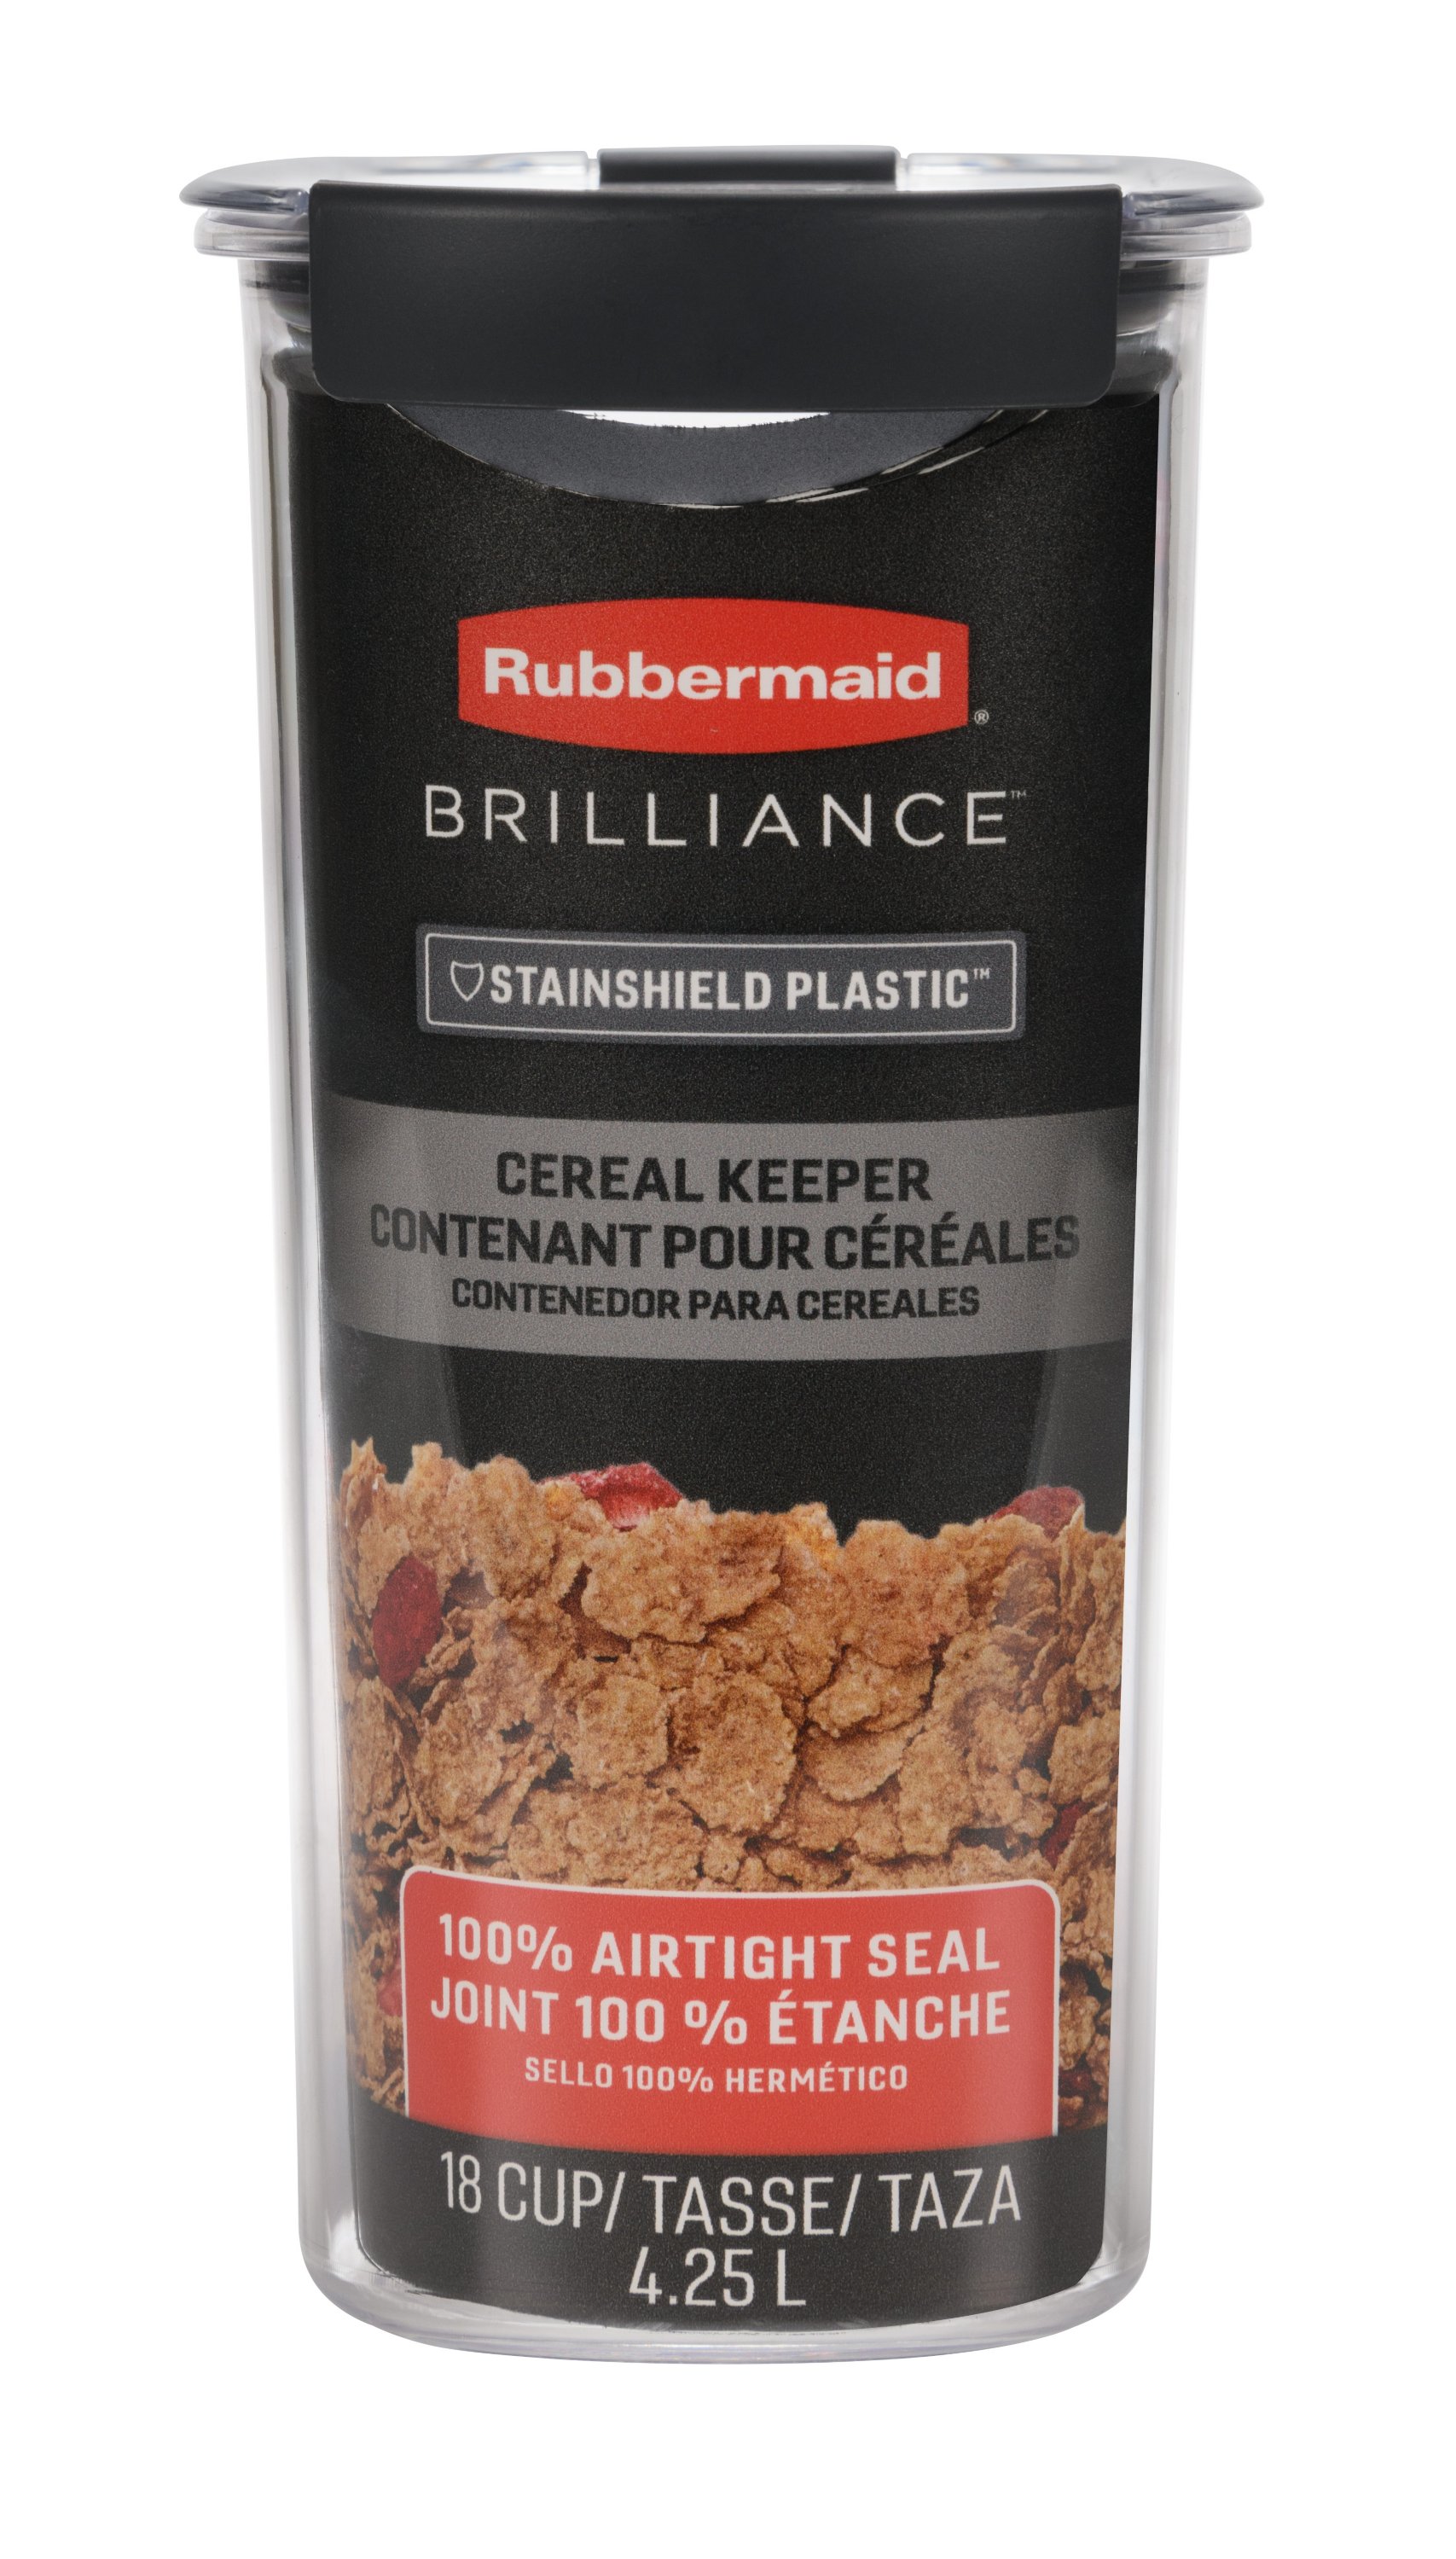 https://s7d9.scene7.com/is/image/NewellRubbermaid/Brilliance%20Cereal%20Keeper-02